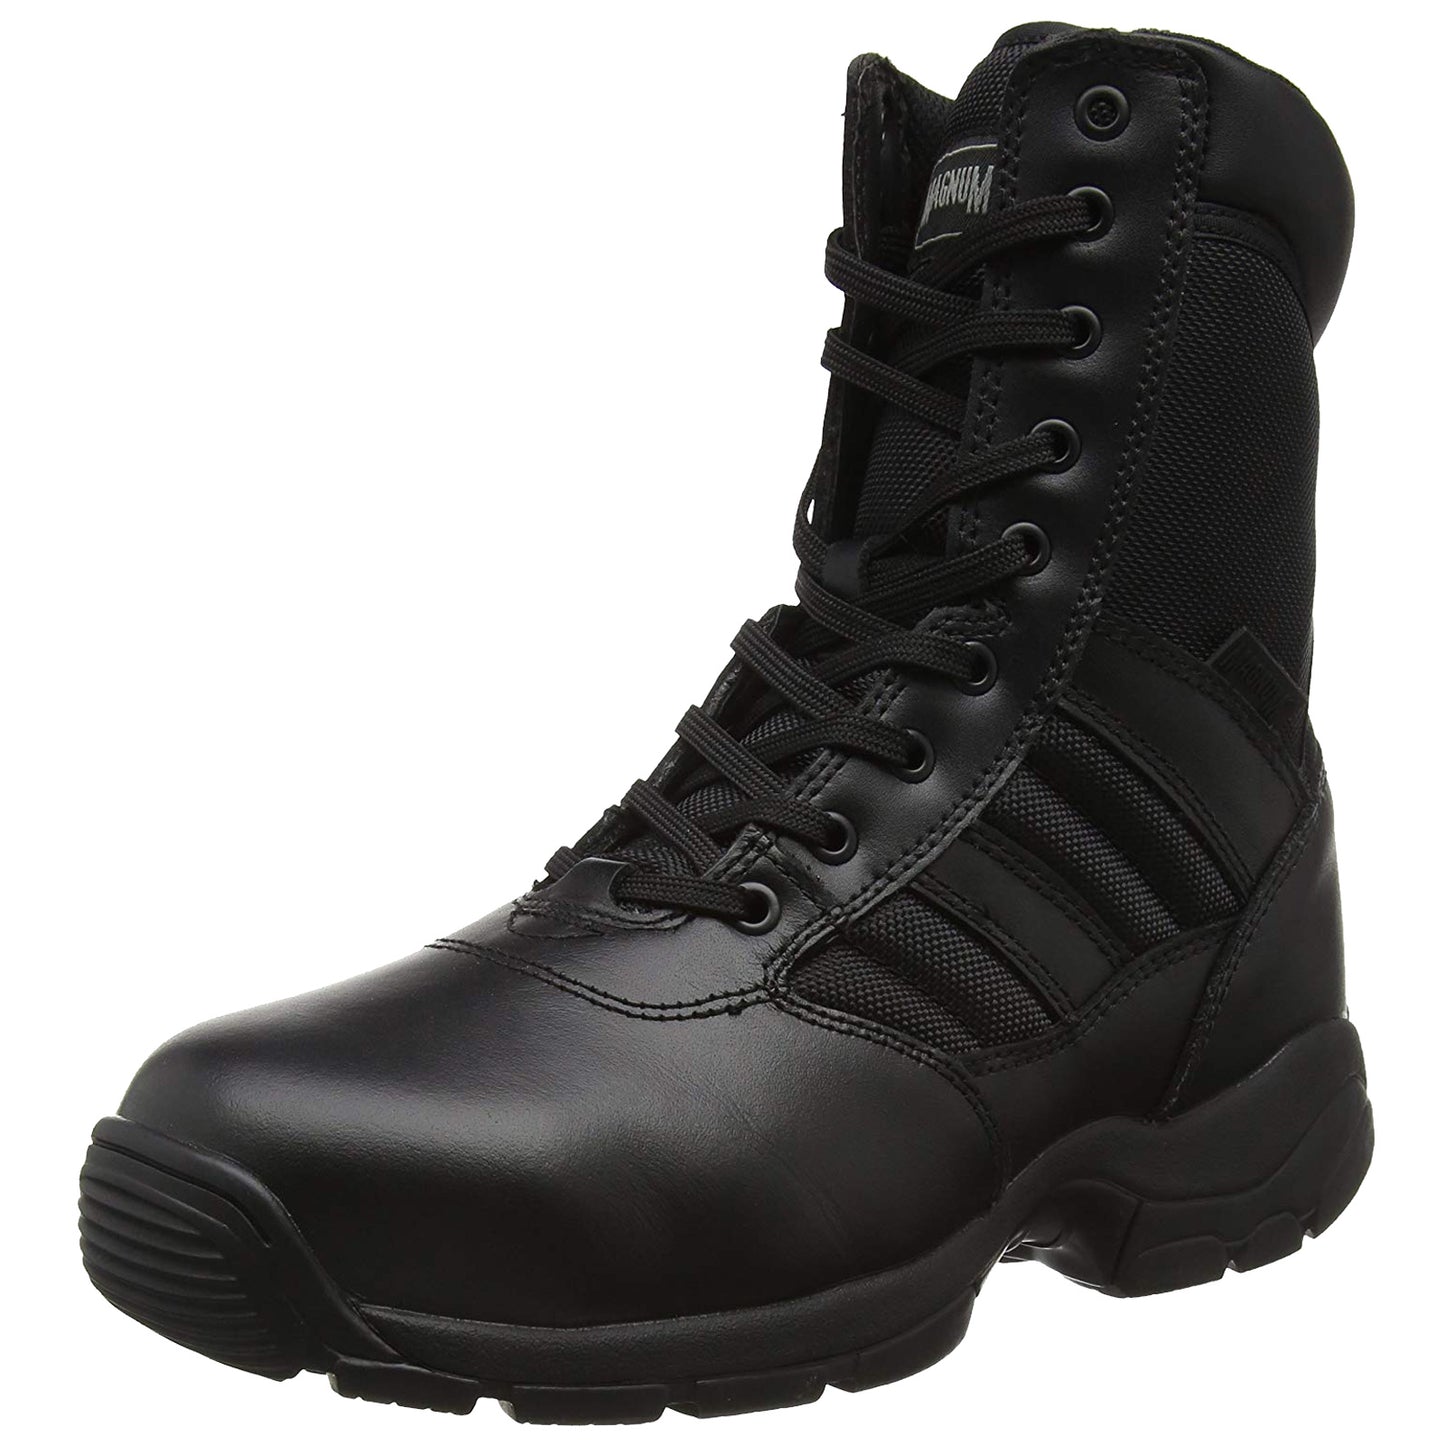 Magnum Mens Panther 8.0 Steel Toe Safety Boots M800173